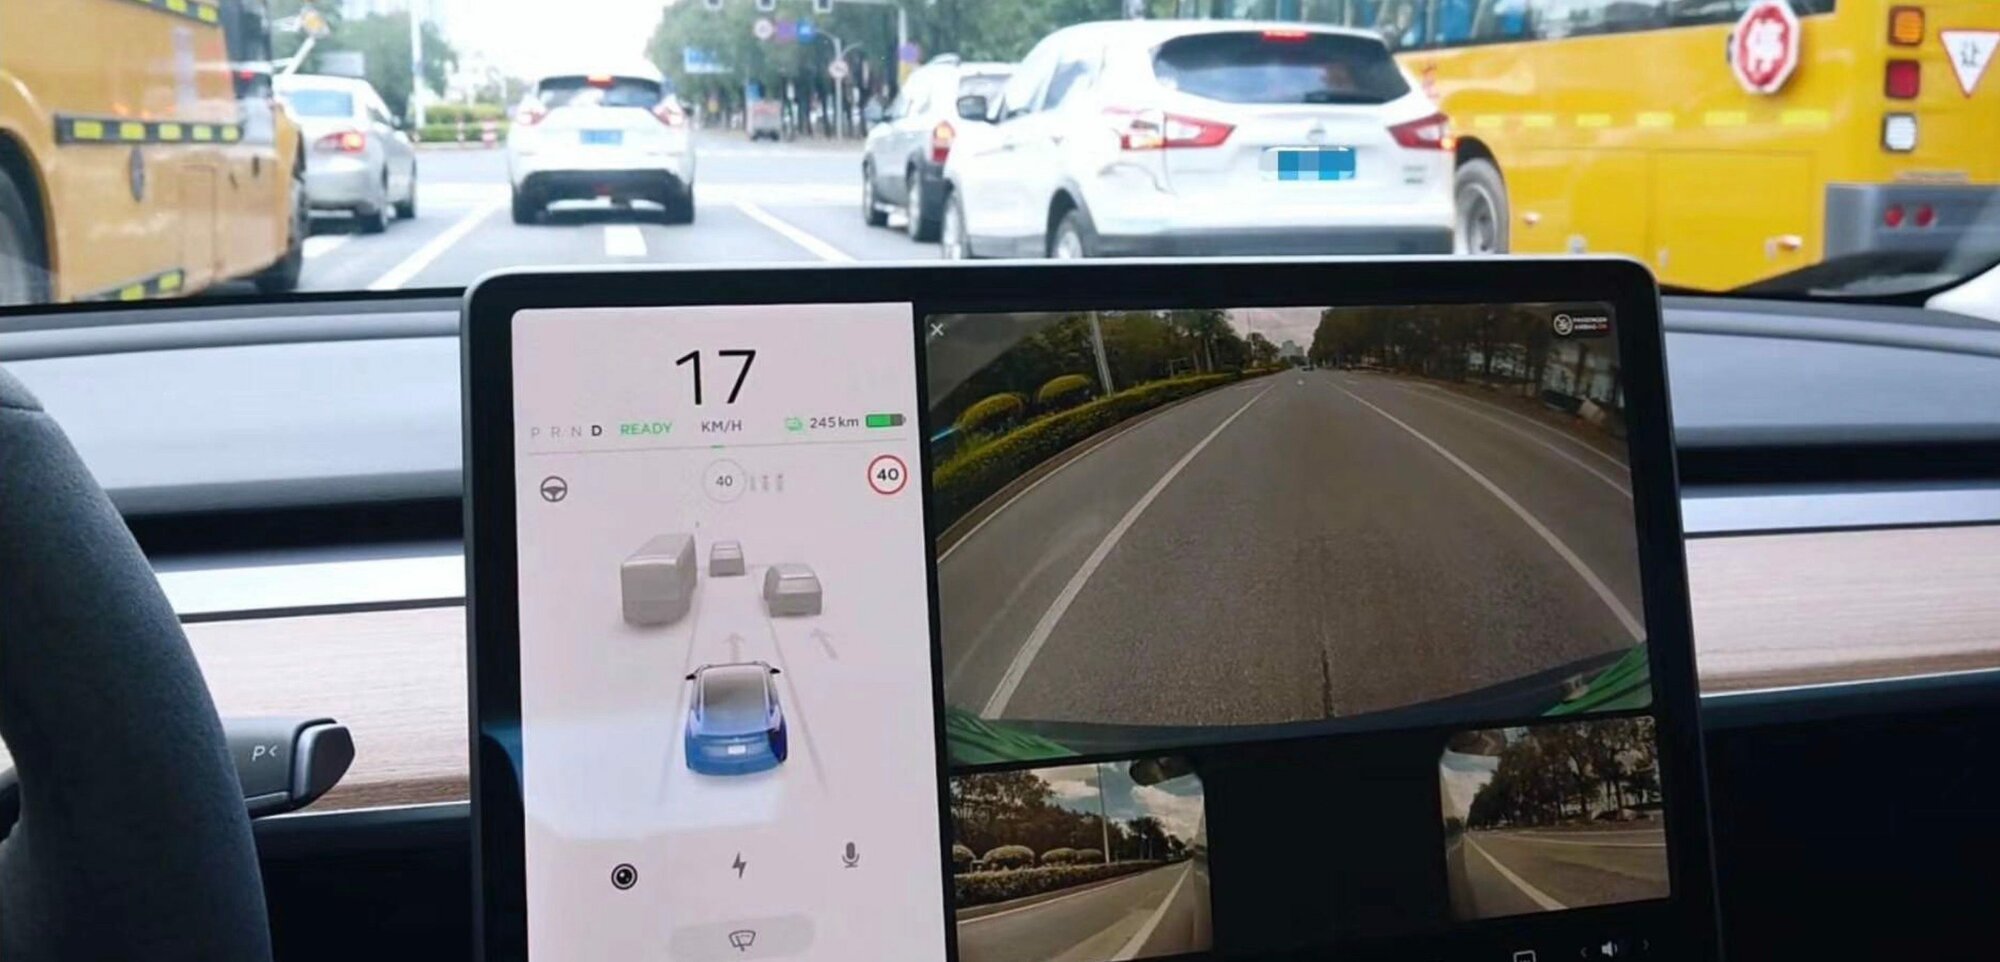 Close up view of front parking assist video camera on the car